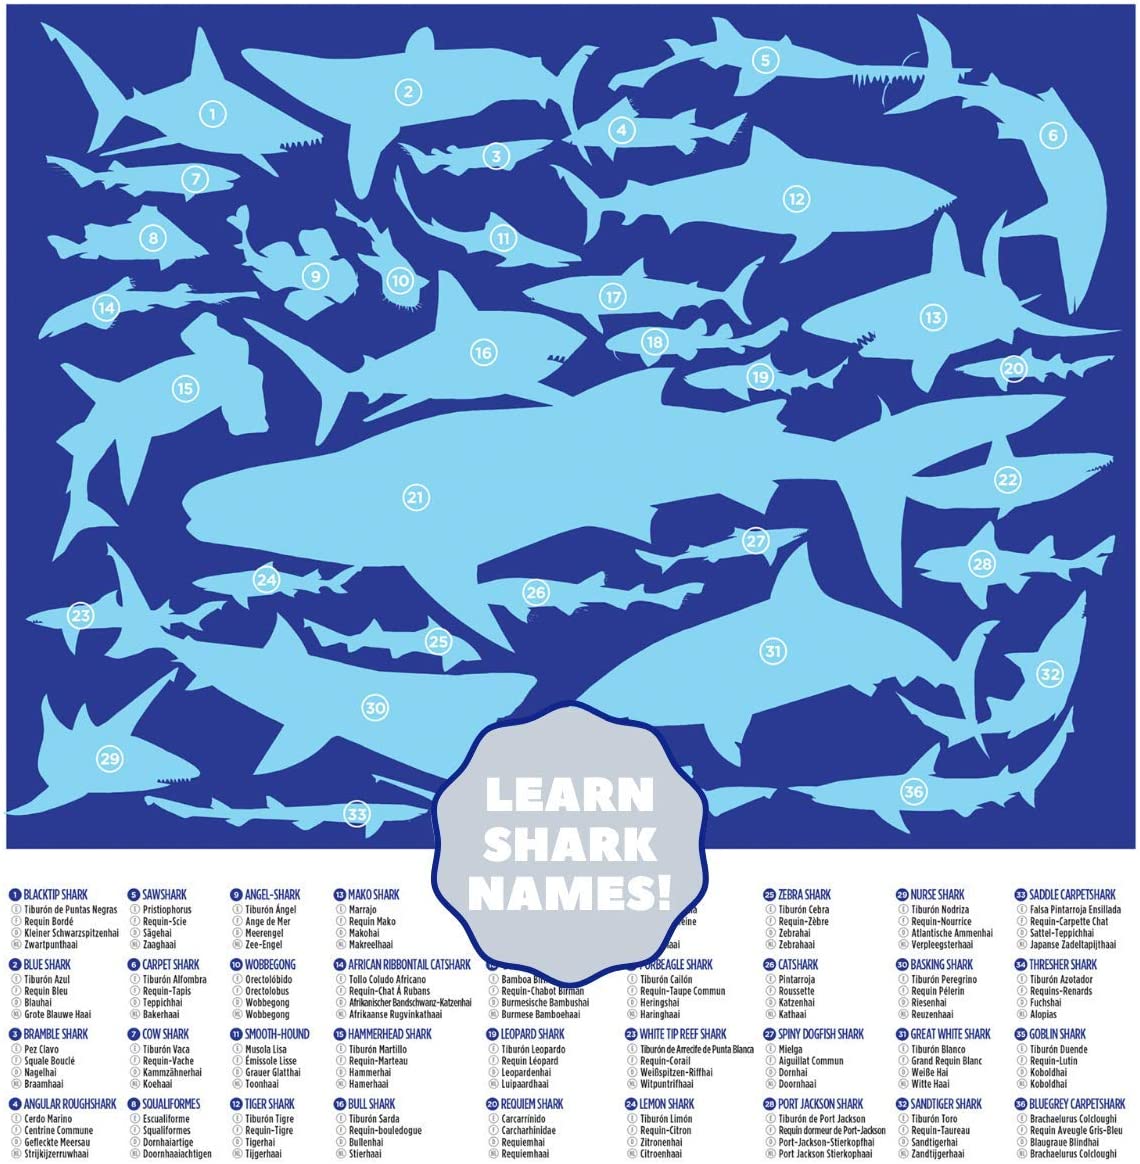 36 SHARKS 100-PC PUZZLE